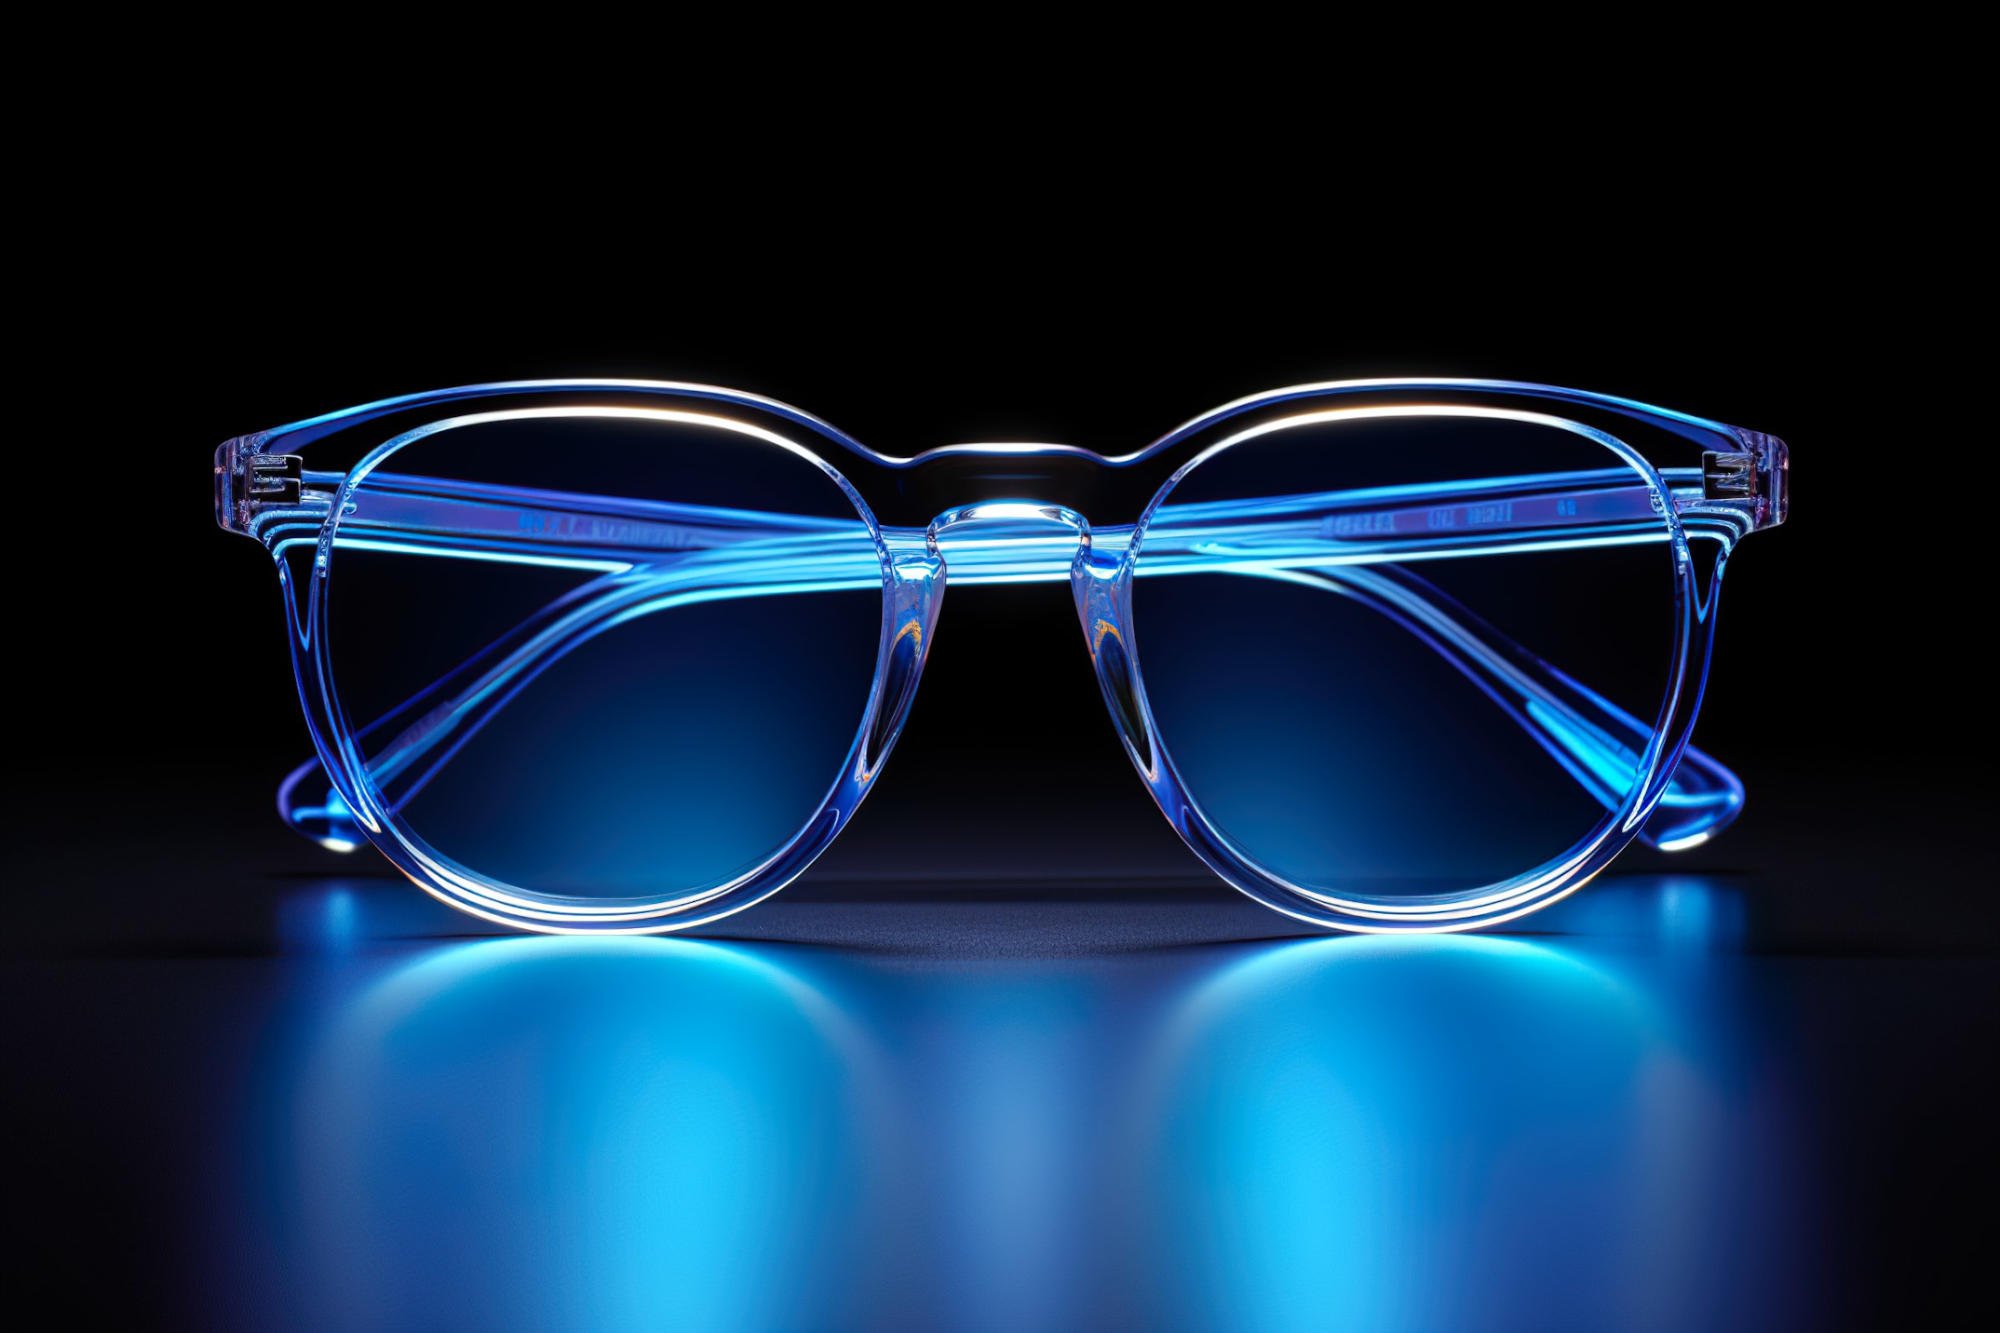 Blue-Light Glasses Debunked? New Study Casts Doubt on Eye Strain and ...